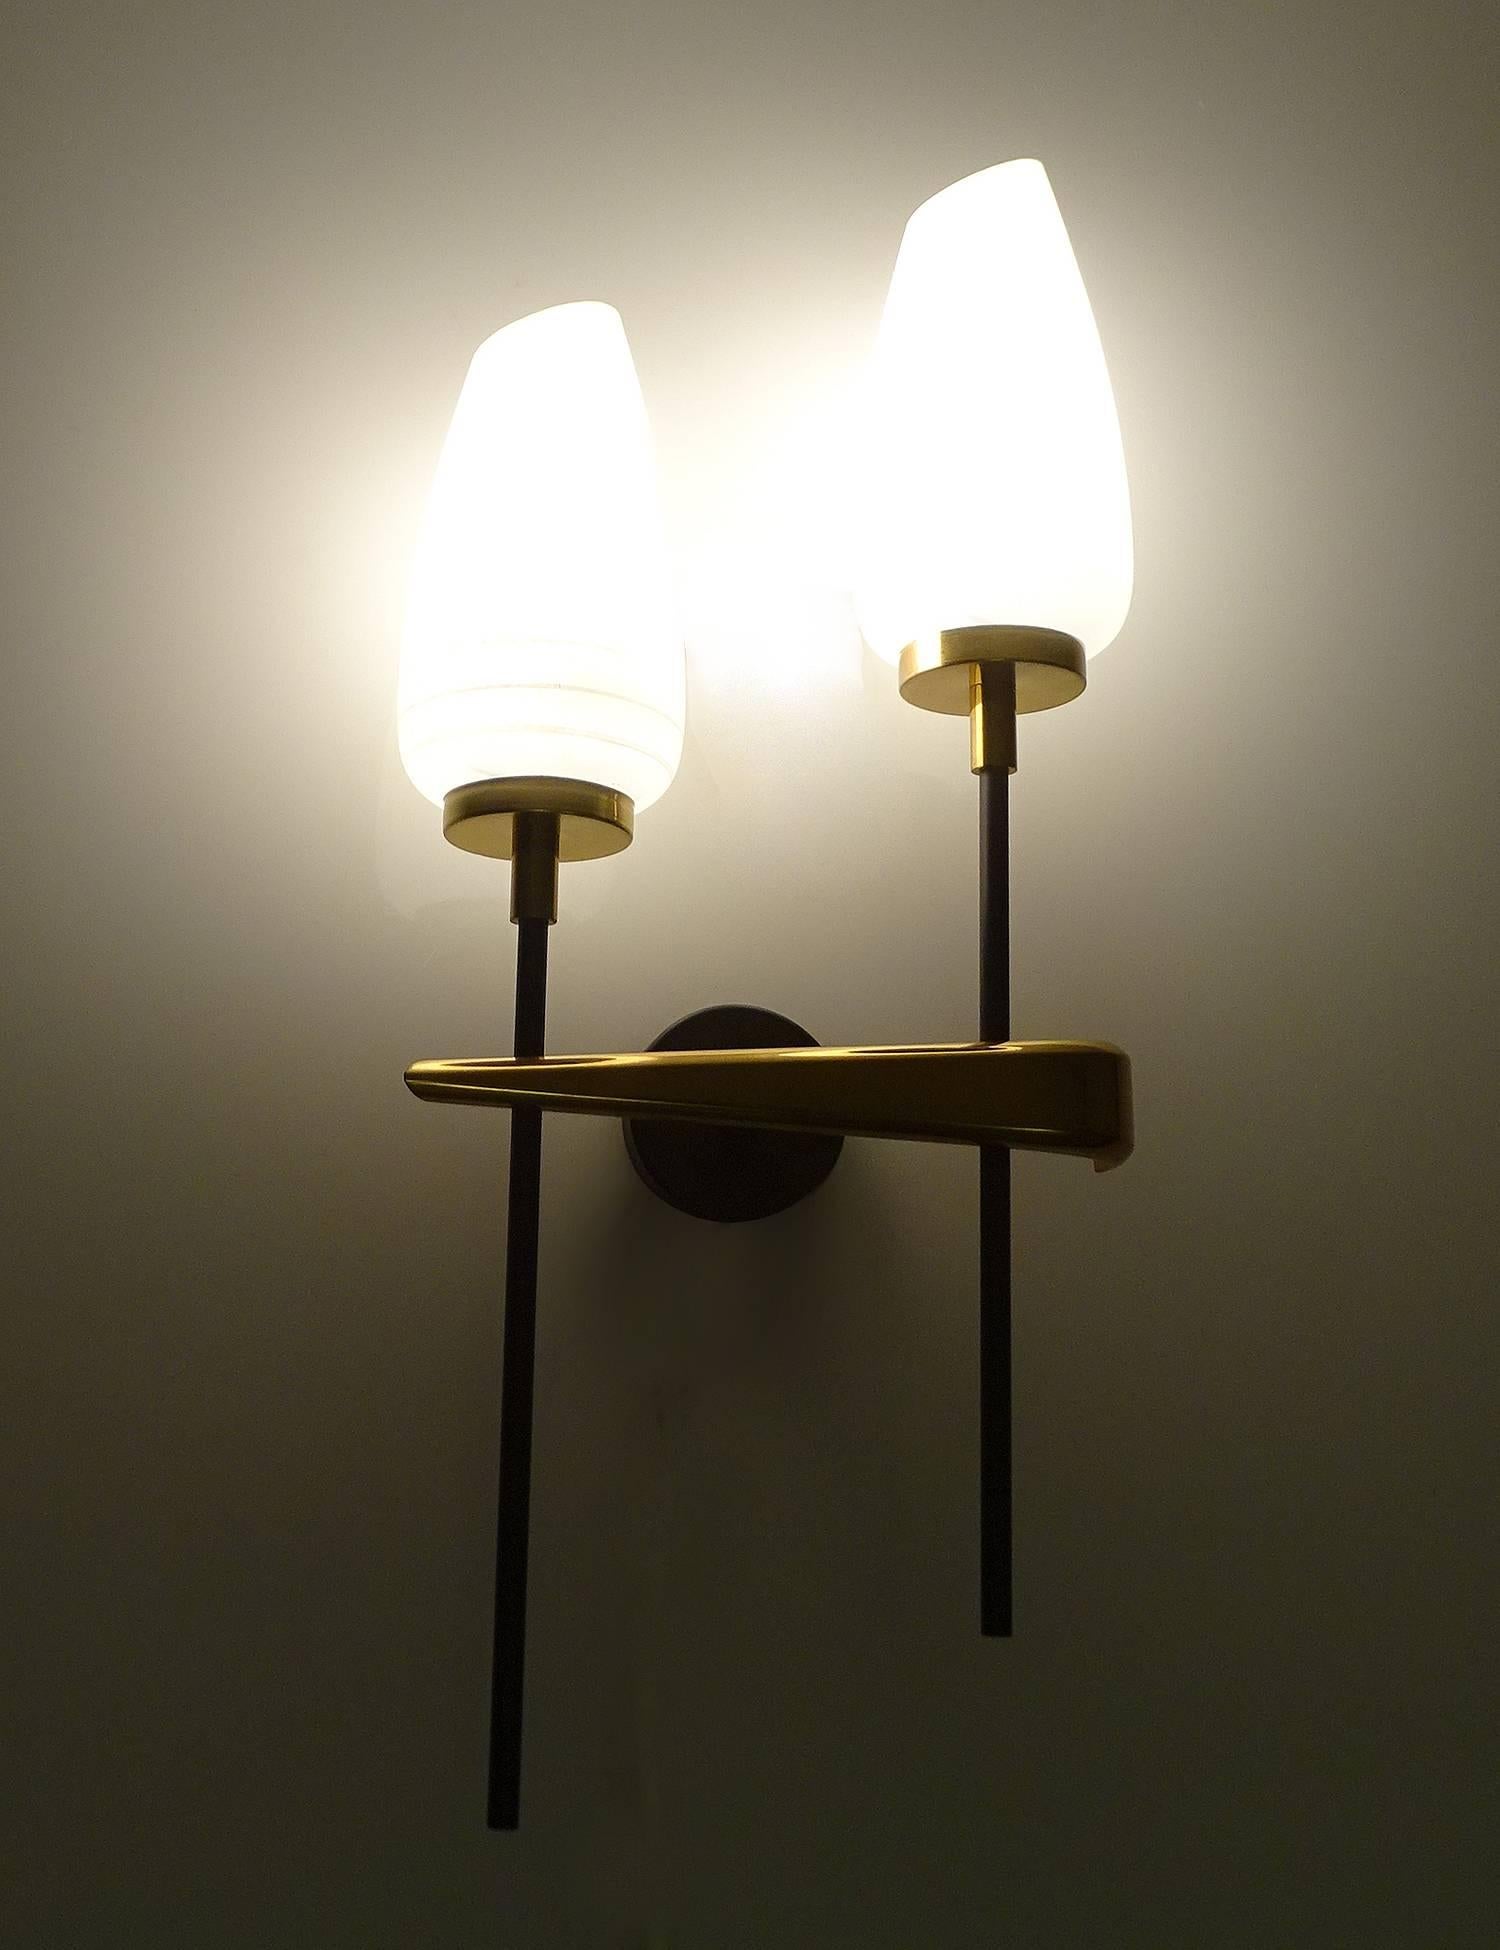 Pair of large French sconces by Maison Arlus from the 1960s, featuring a black enameled structure with with  upright lights (ascending and descending like musical notes). with a swooping heavy bronze headpiece, chamfered opaline glass shades with an